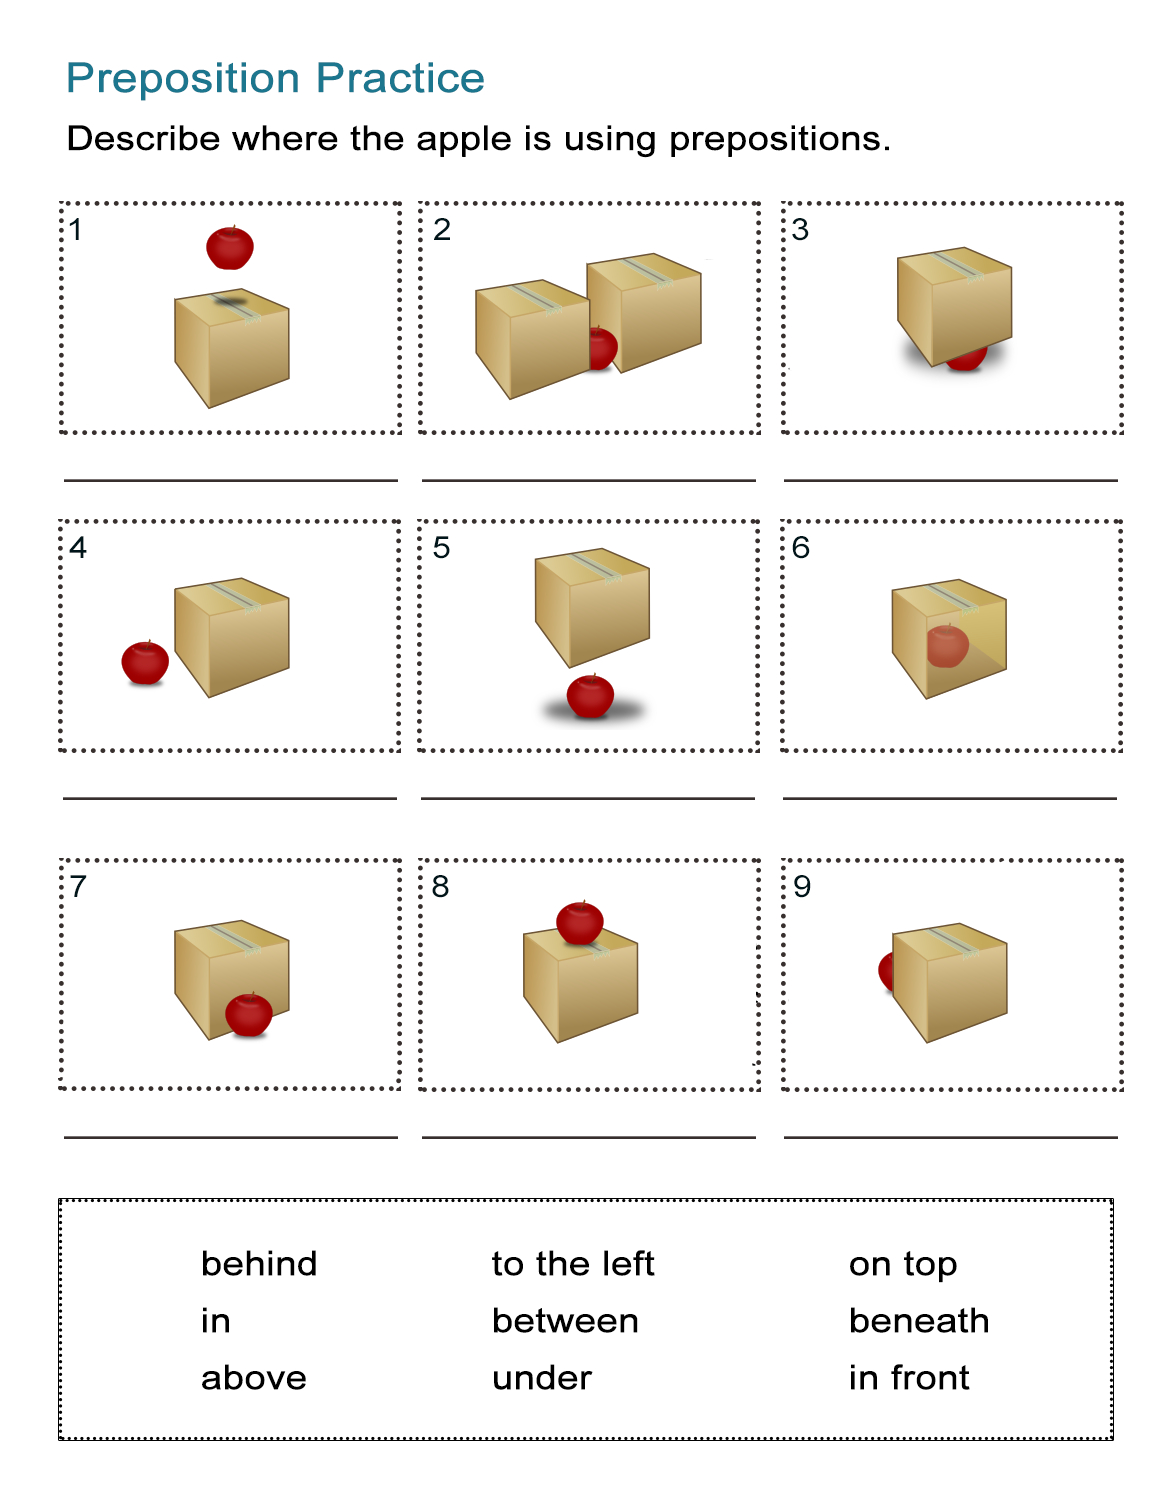 Prepositions Of Location Worksheet: Where Is The Apple? - All Esl | Free Printable Worksheets For Prepositions